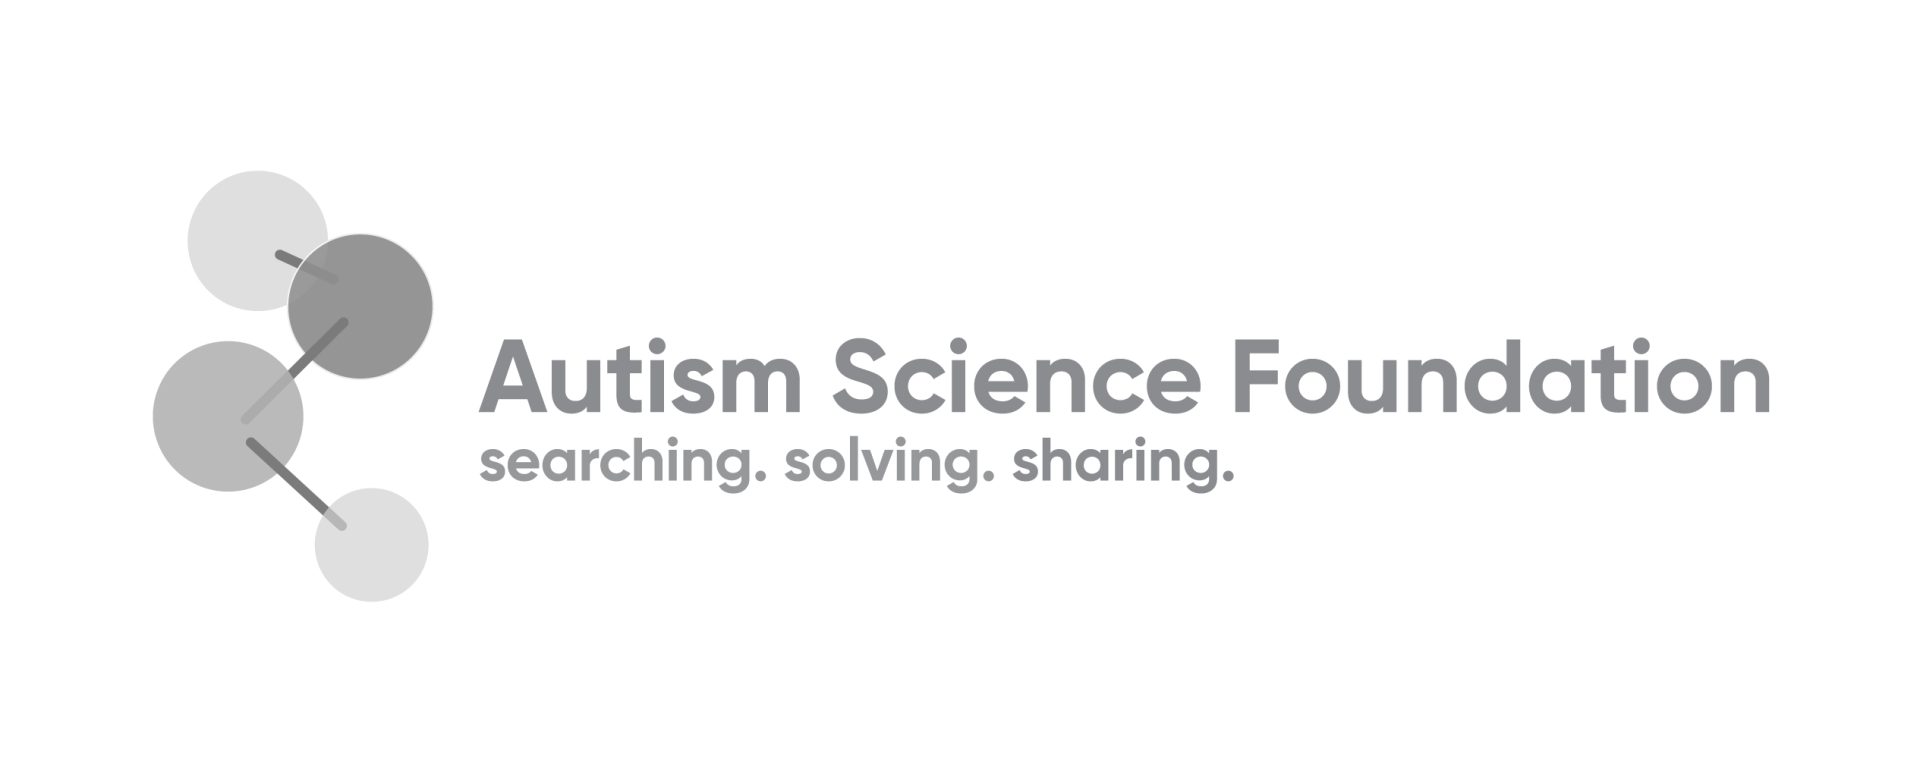 interior Podcast: Scientists know in their gut how the GI symptoms are linked to autism banner image